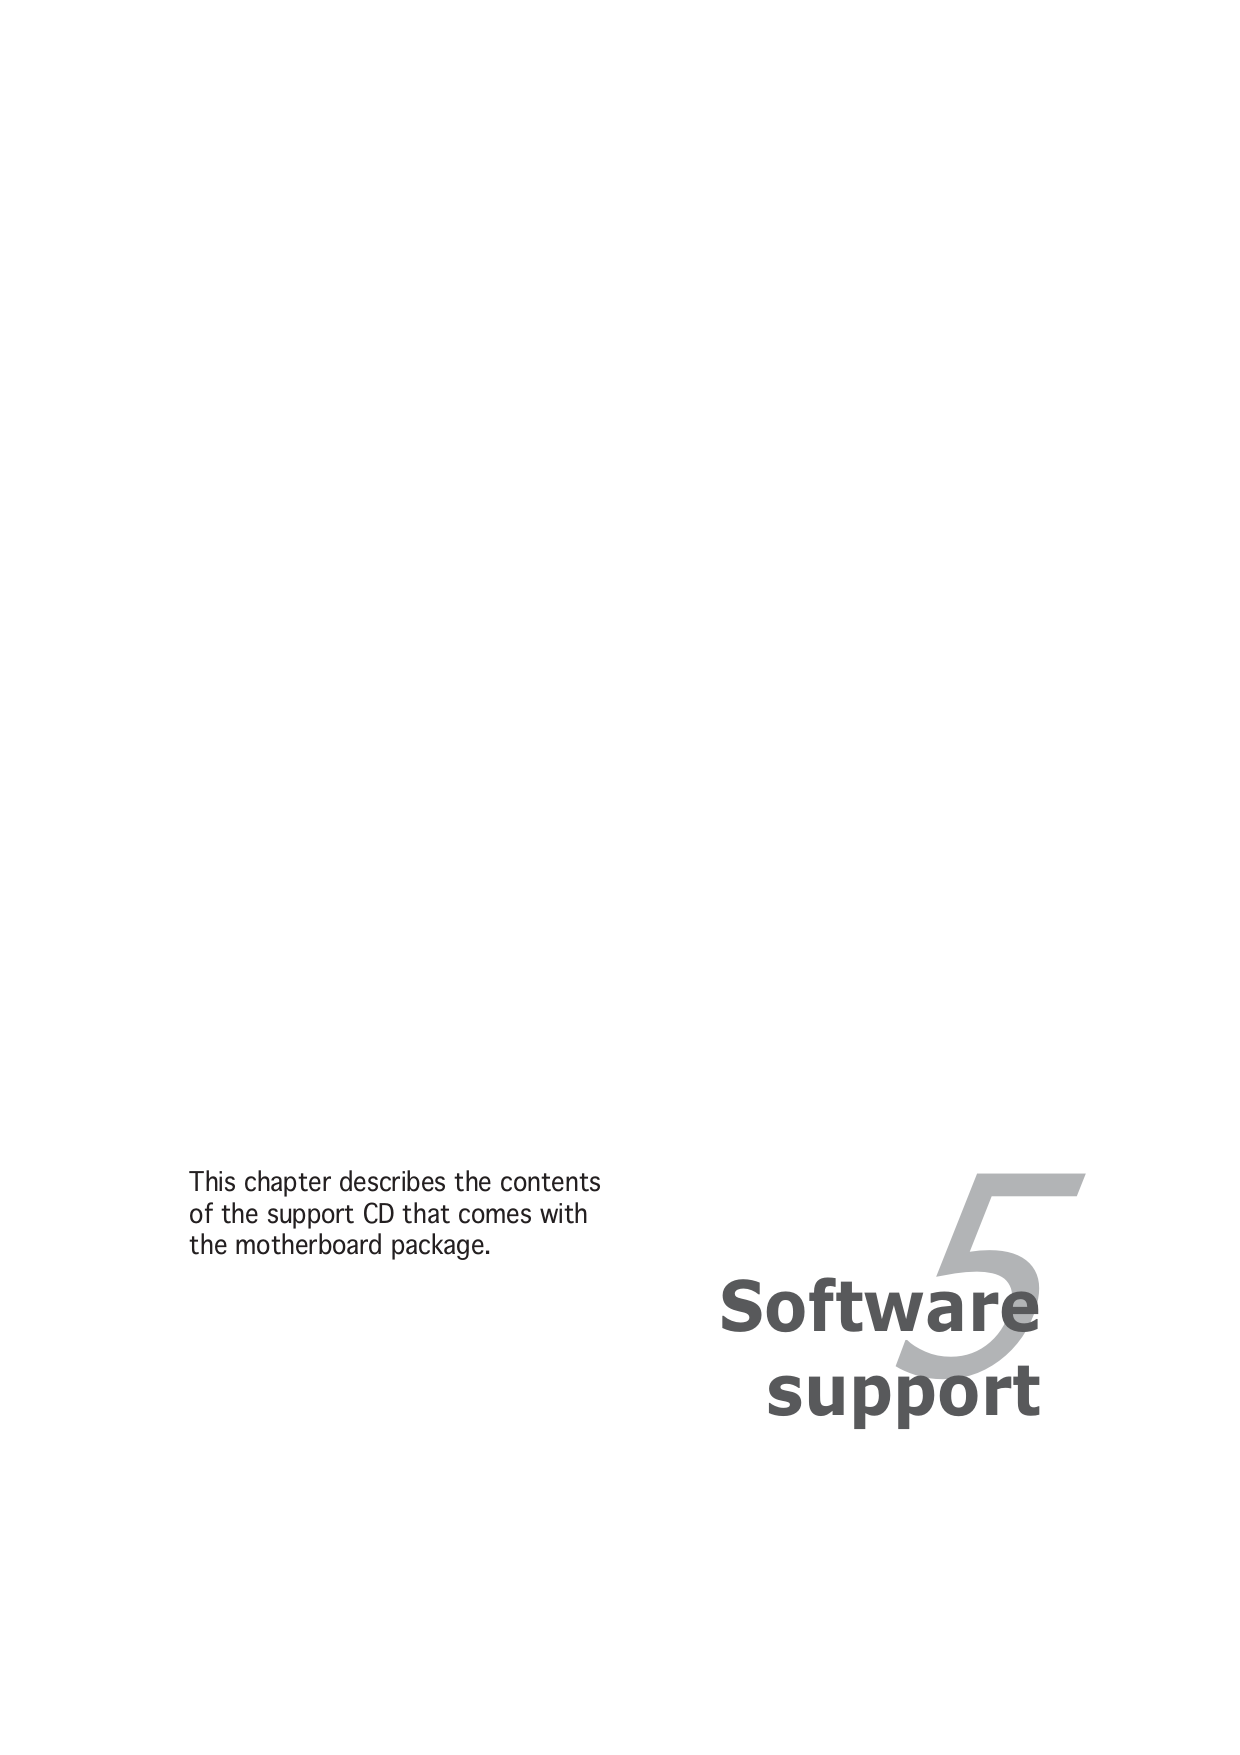 5SoftwaresupportThis chapter describes the contentsof the support CD that comes withthe motherboard package.